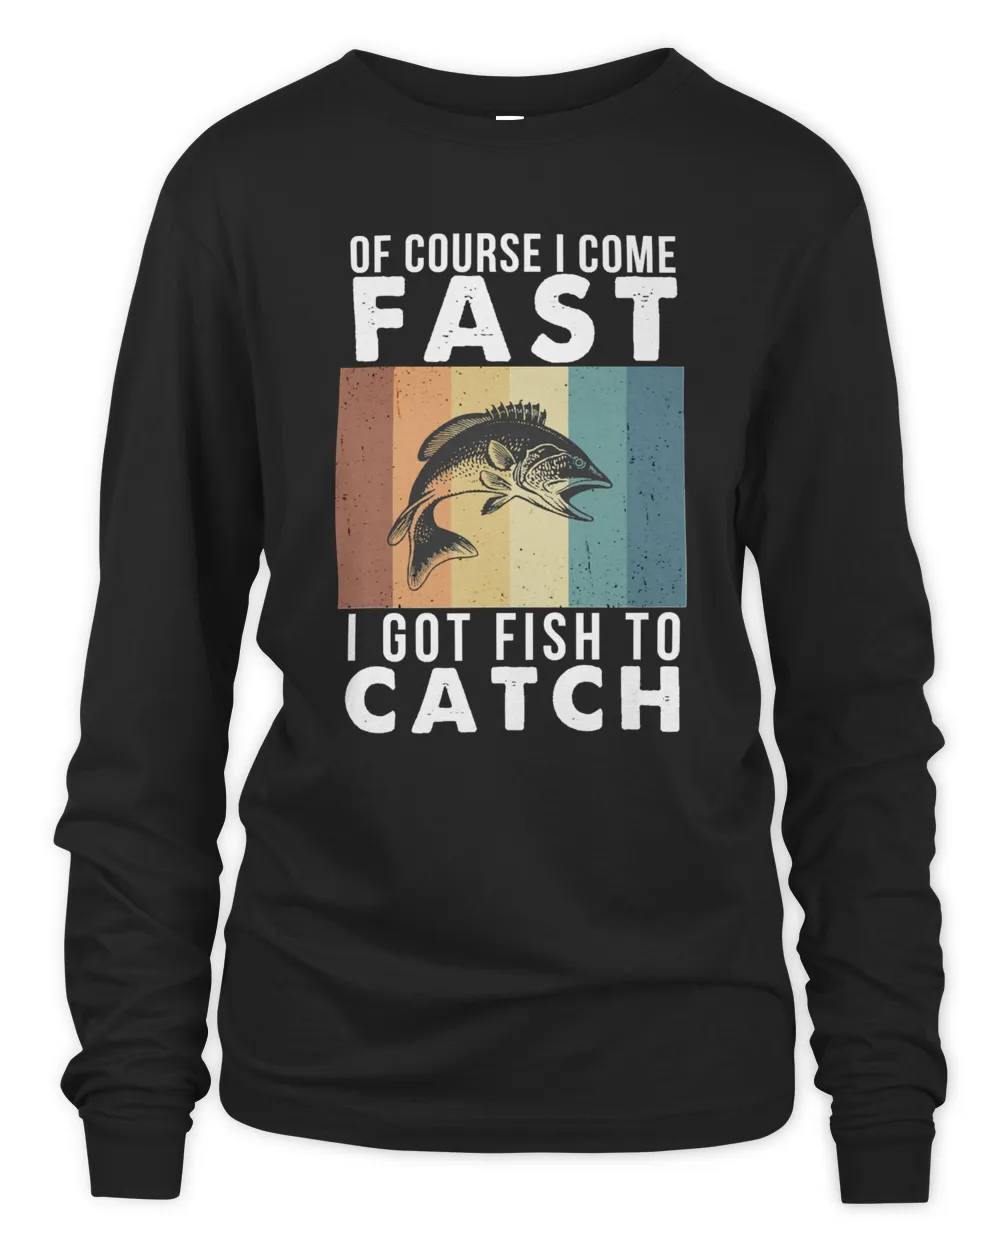 Fishing Colorful design and funny idea80 fisher